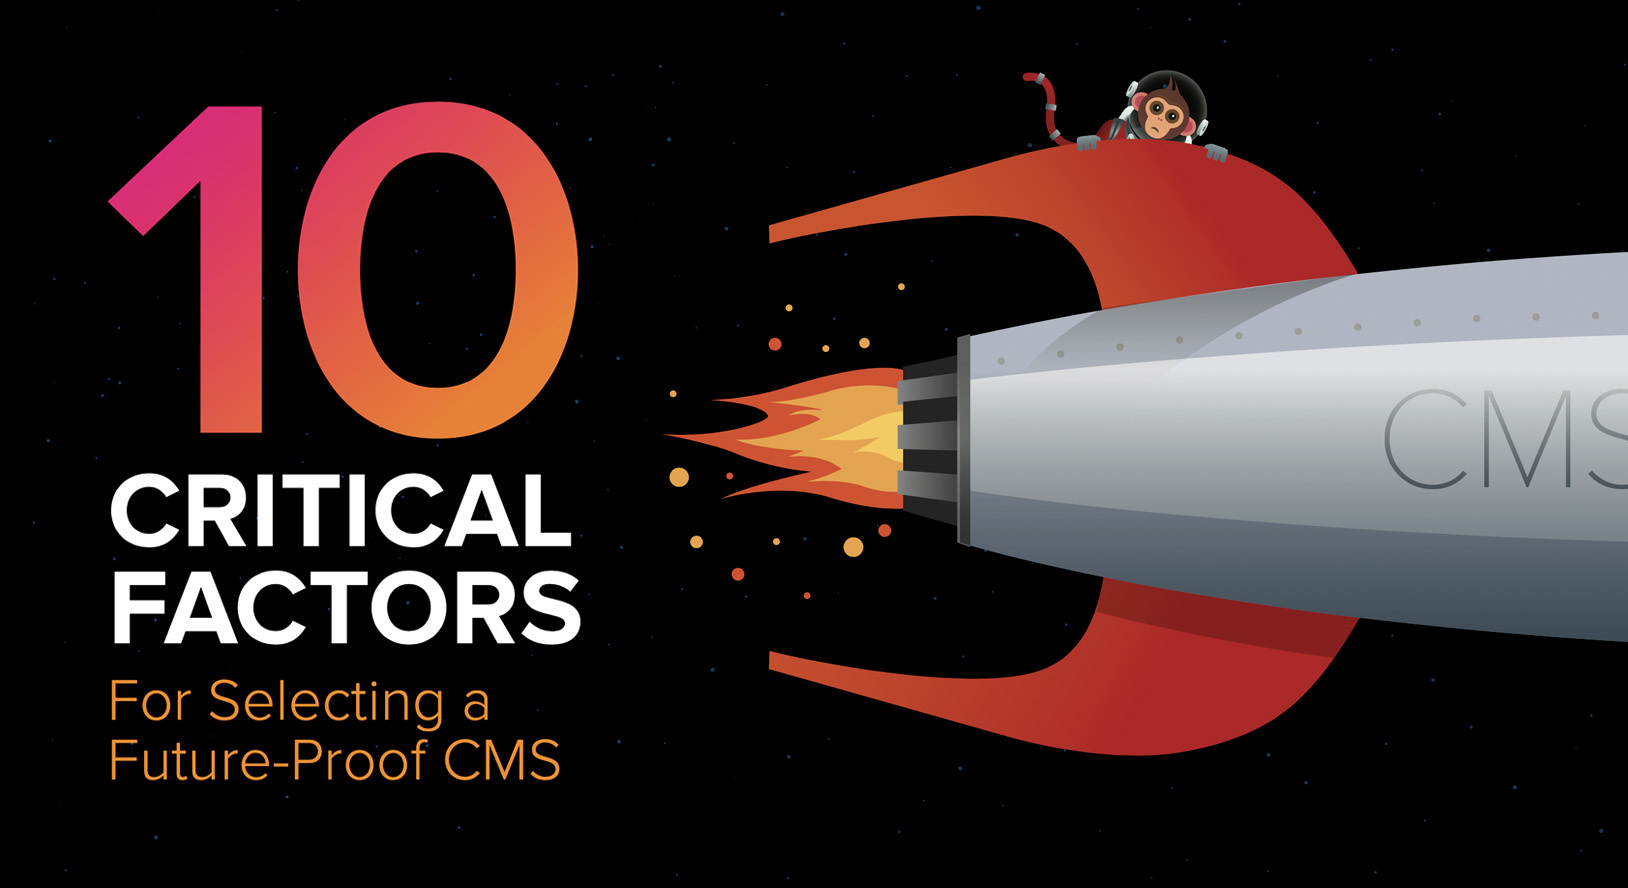 10 Critical Factors for Selecting a Future-Proof CMS Image